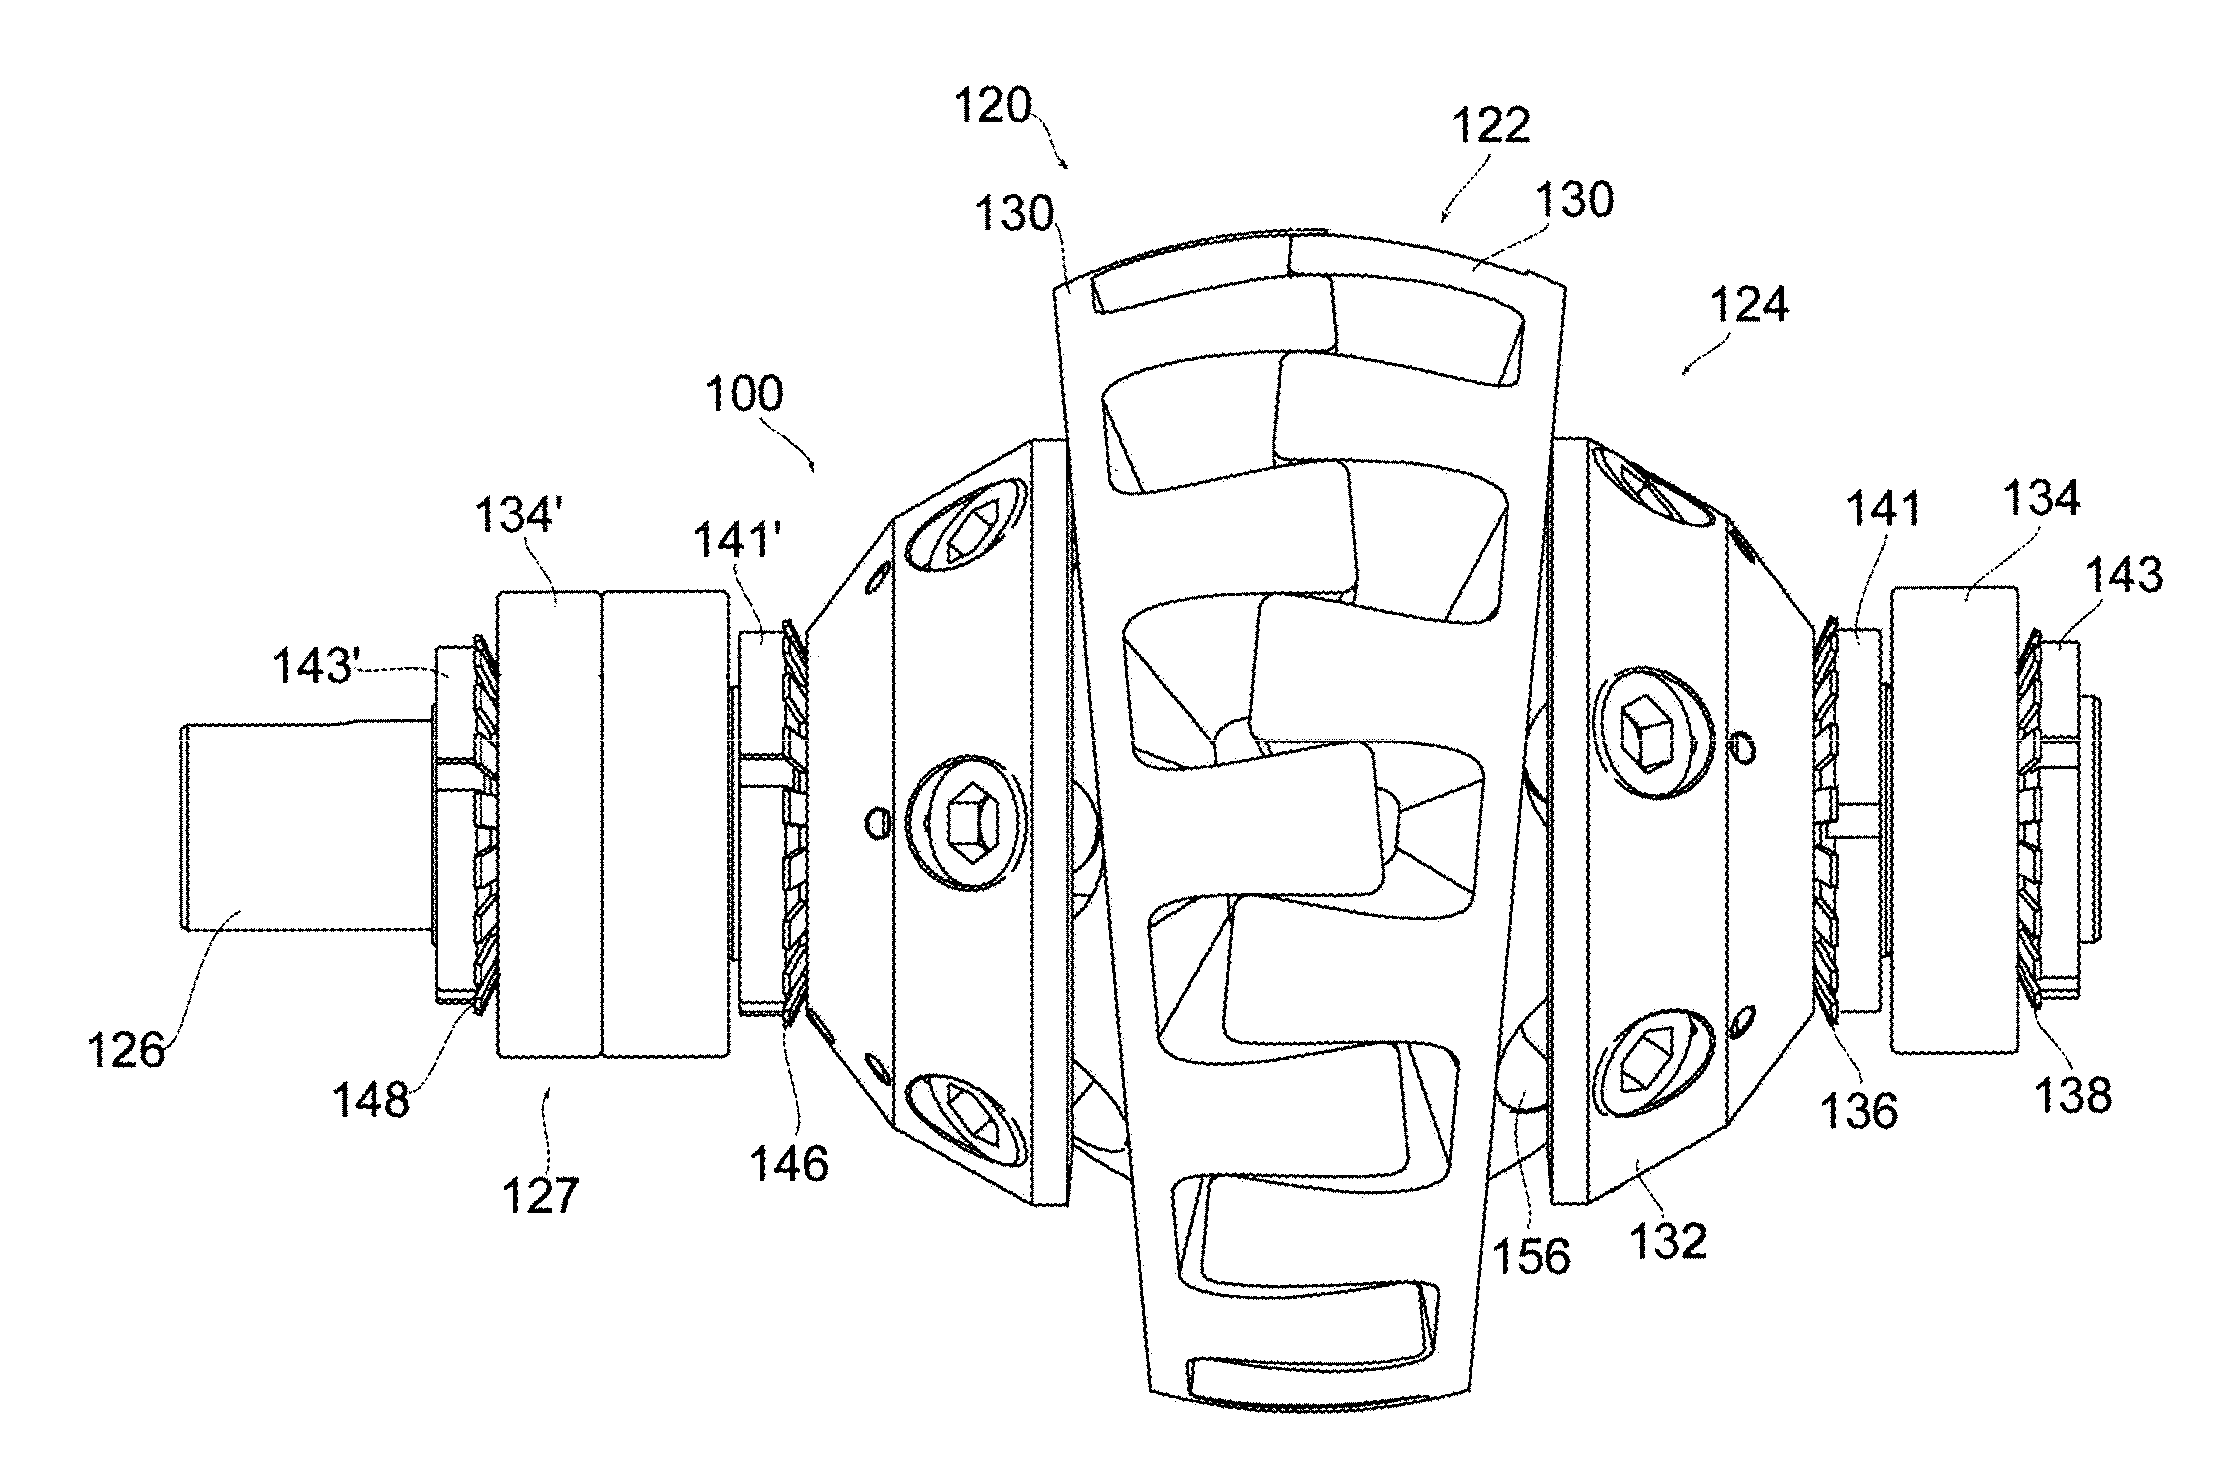 Indexed positive displacement rotary motion device